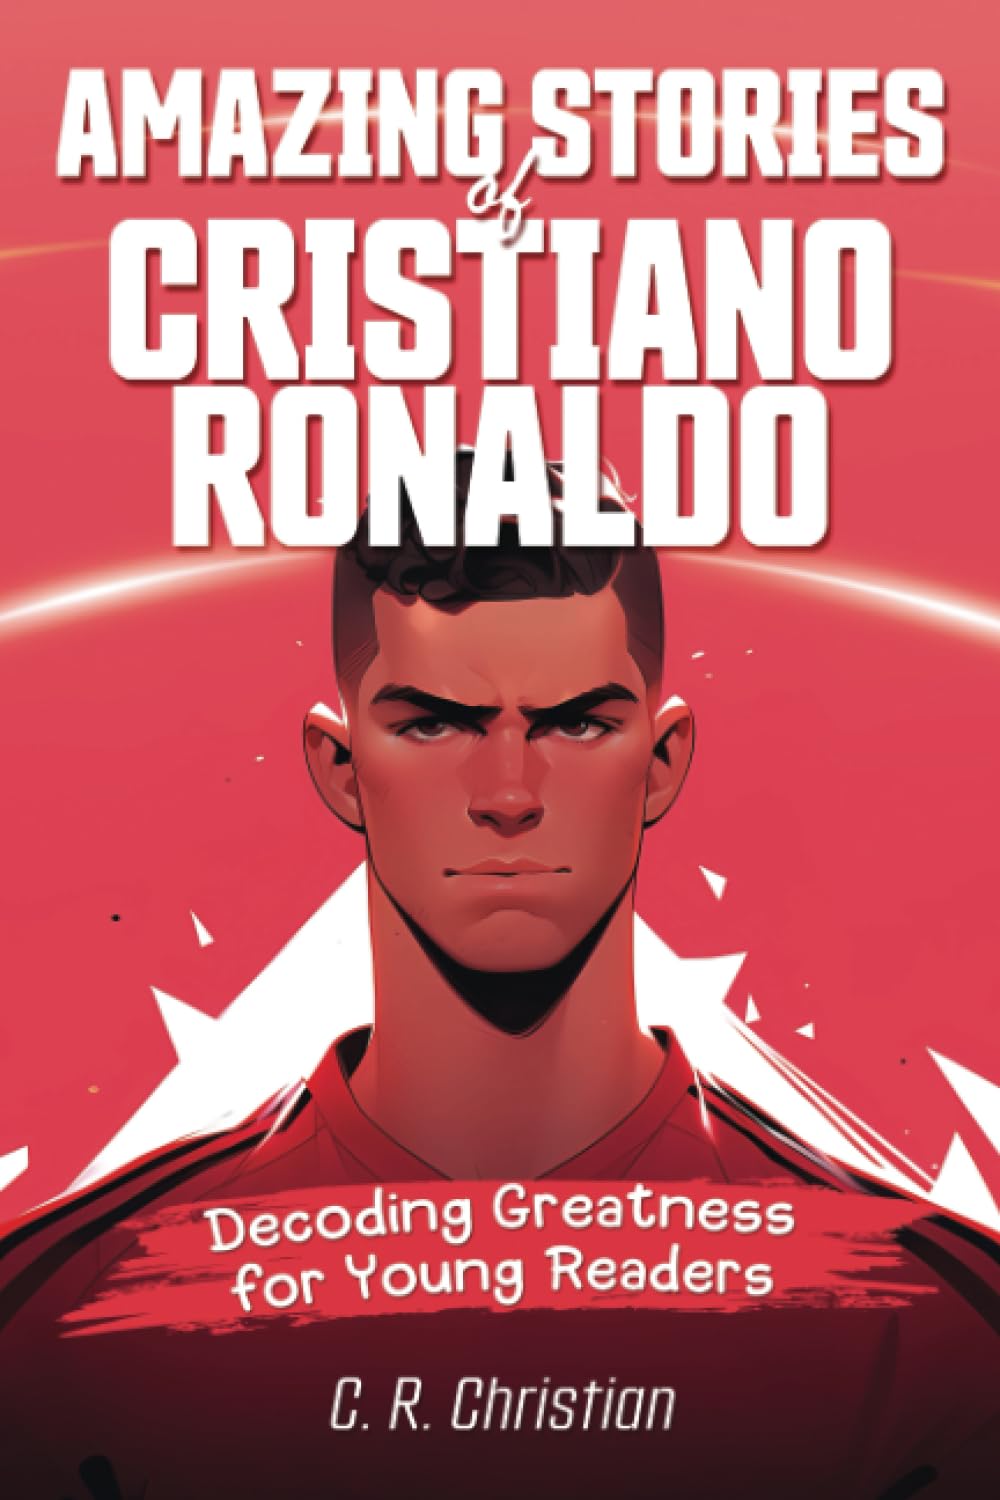 Amazing Stories of Cristiano Ronaldo: Decoding Greatness for Young Readers (A Biography of One of the World's Greatest Soccer Legends for Kids and ... Stories of the Greatest Inspirational People)